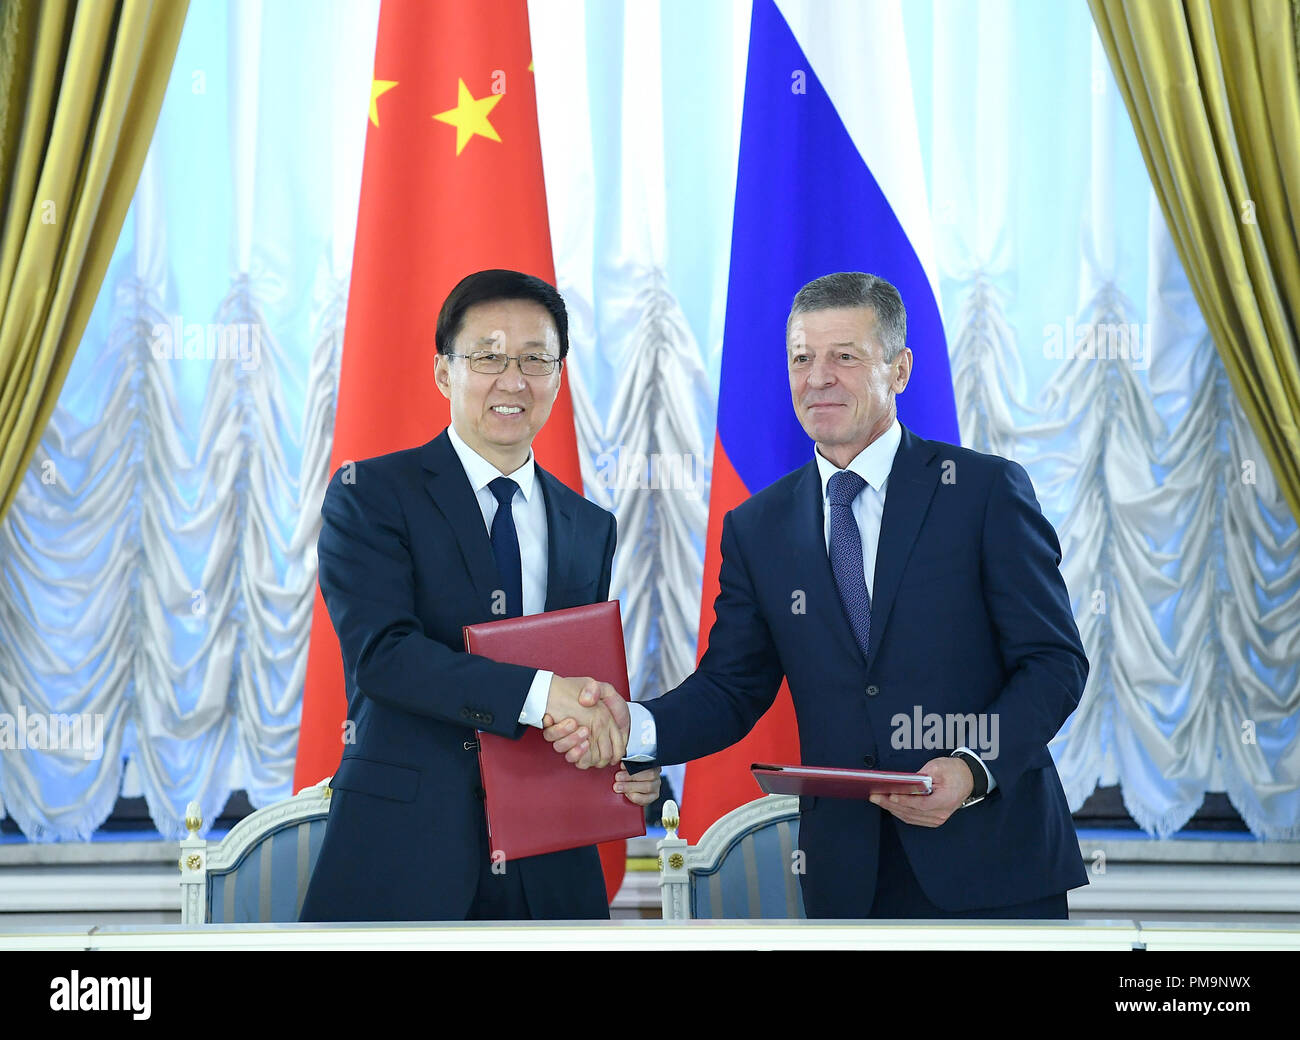 Moscow, Russia. 17th Sep, 2018. Chinese Vice Premier Han Zheng (L), also a member of the Standing Committee of the Political Bureau of the Communist Party of China (CPC) Central Committee, and Russian Deputy Prime Minister Dmitry Kozak sign the summary of minutes of the 15th meeting of the China-Russia Energy Cooperation Committee in Moscow, Russia, Sept. 17, 2018. Han met with Kozak in Moscow on Monday and co-chaired the meeting with him. Credit: Yan Yan/Xinhua/Alamy Live News Stock Photo